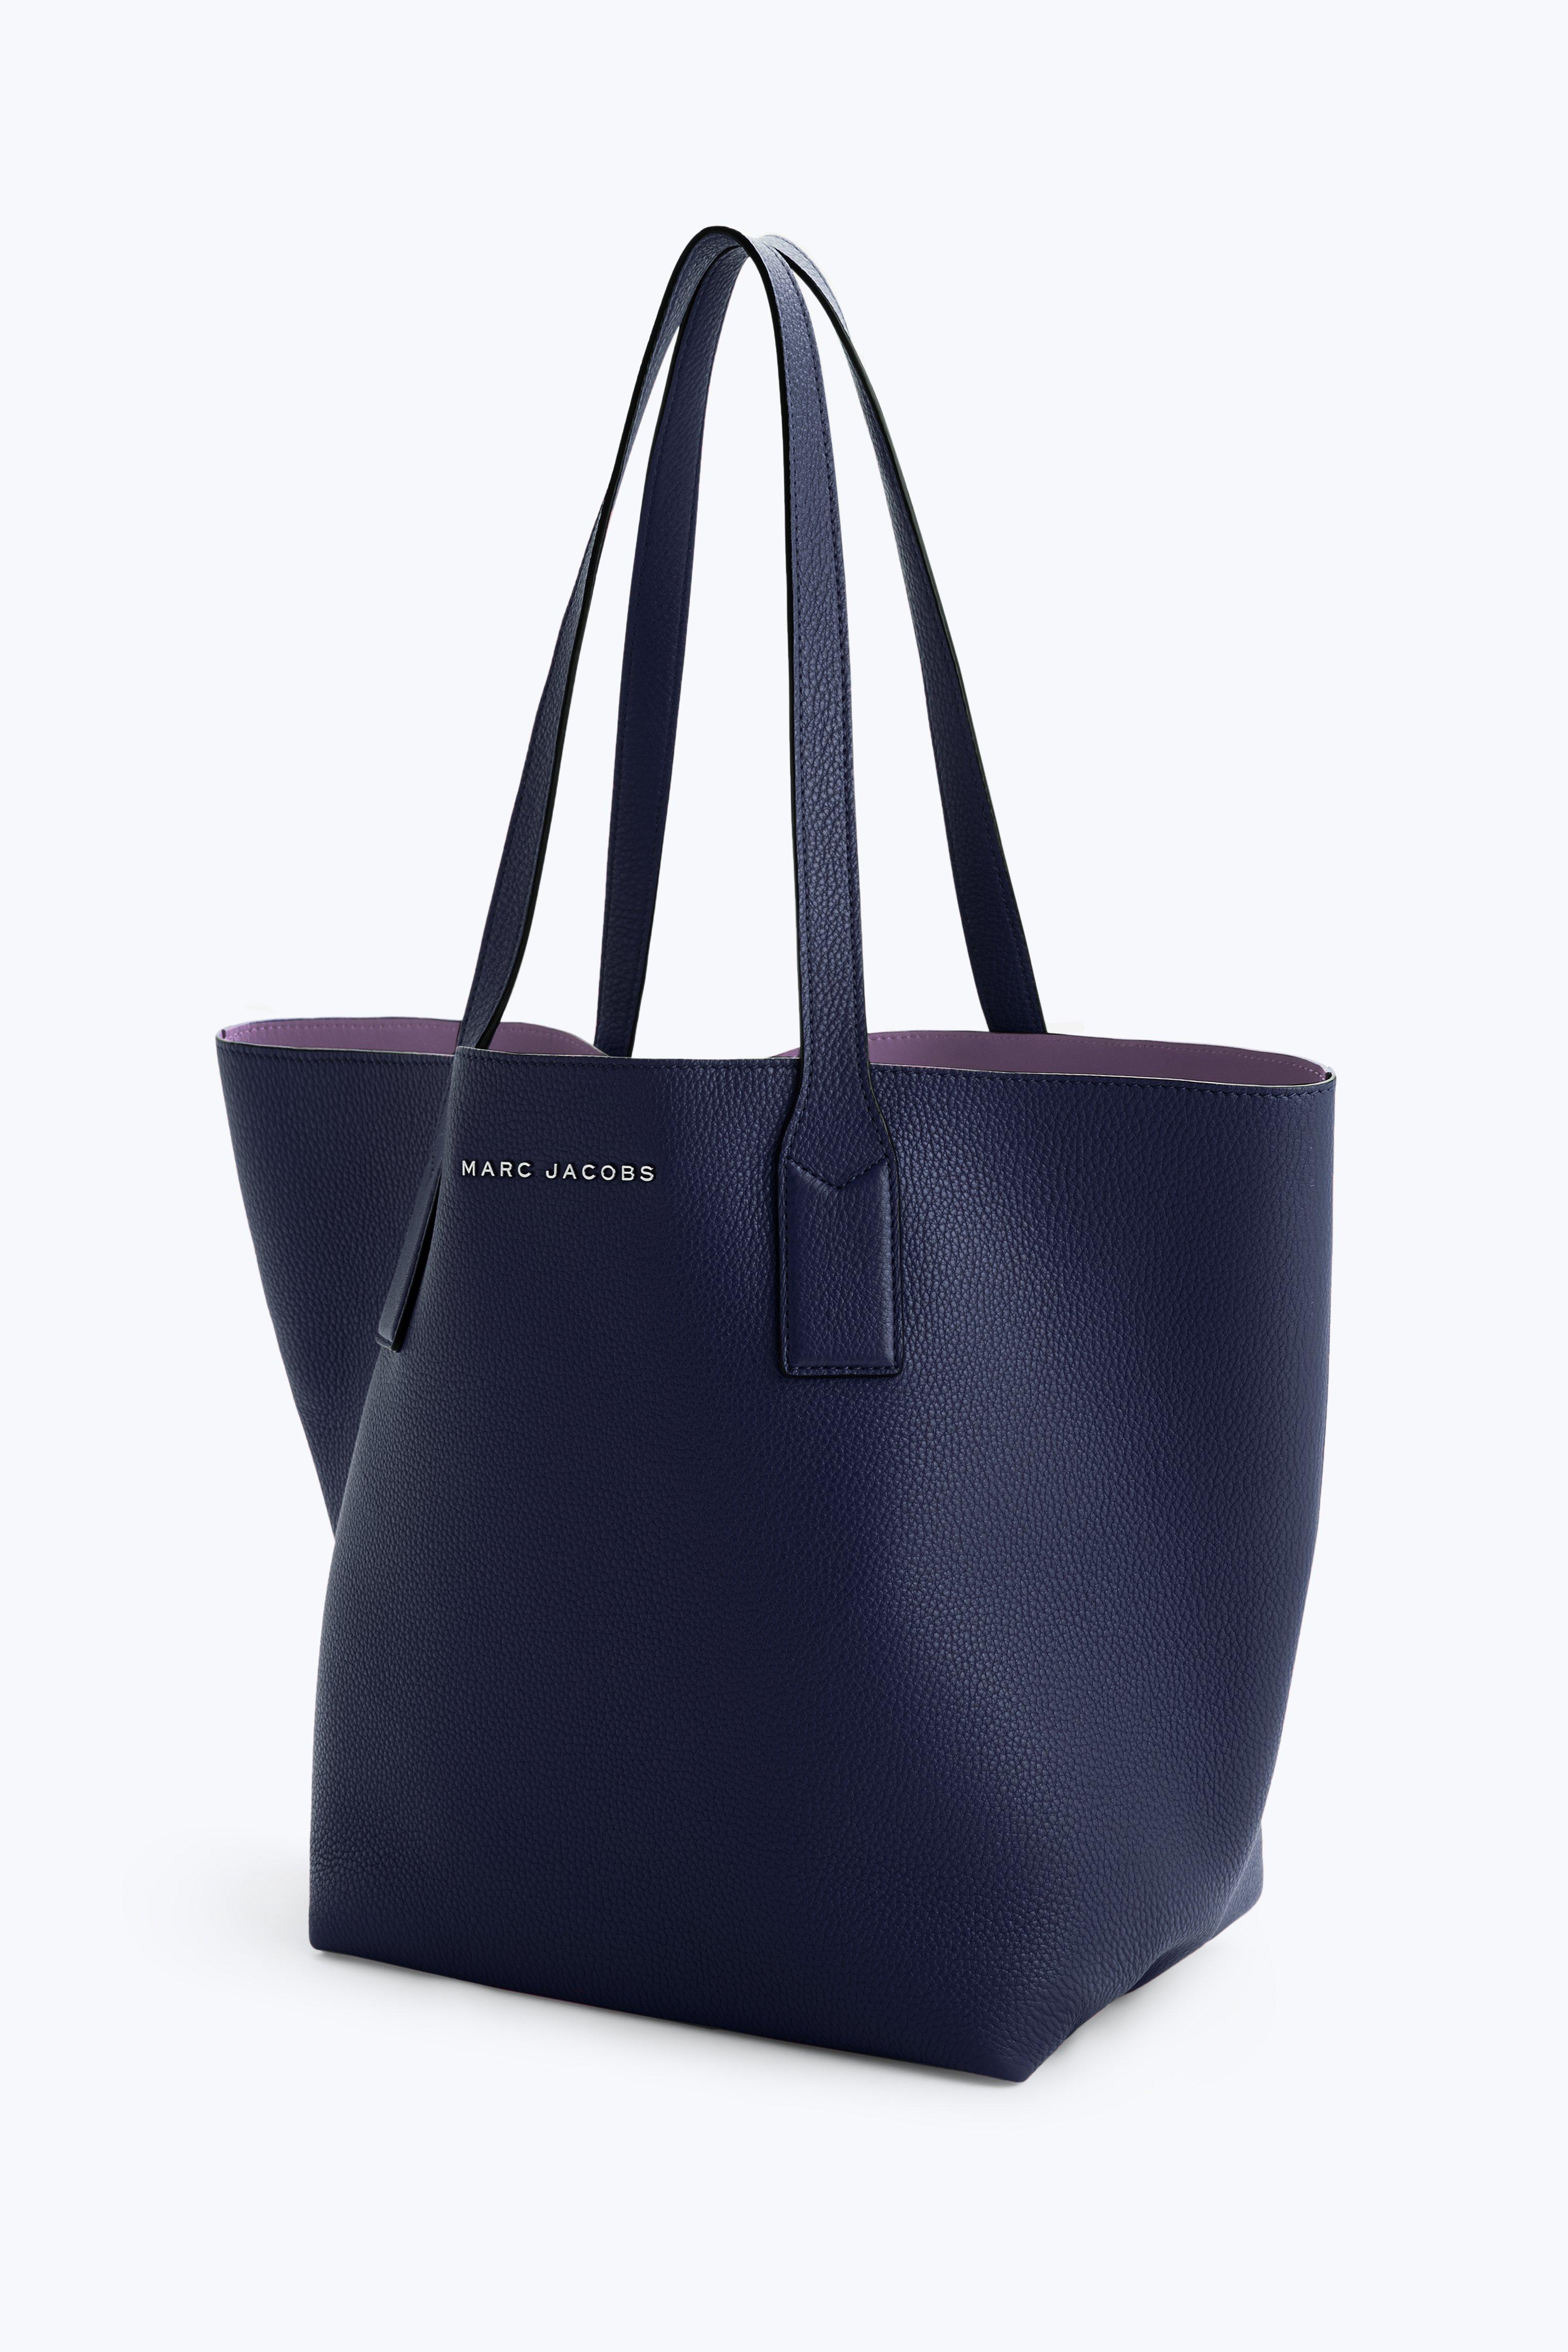 MARC JACOBS Wingman Pebbled Leather Tote in Midnight Blue | ModeSens